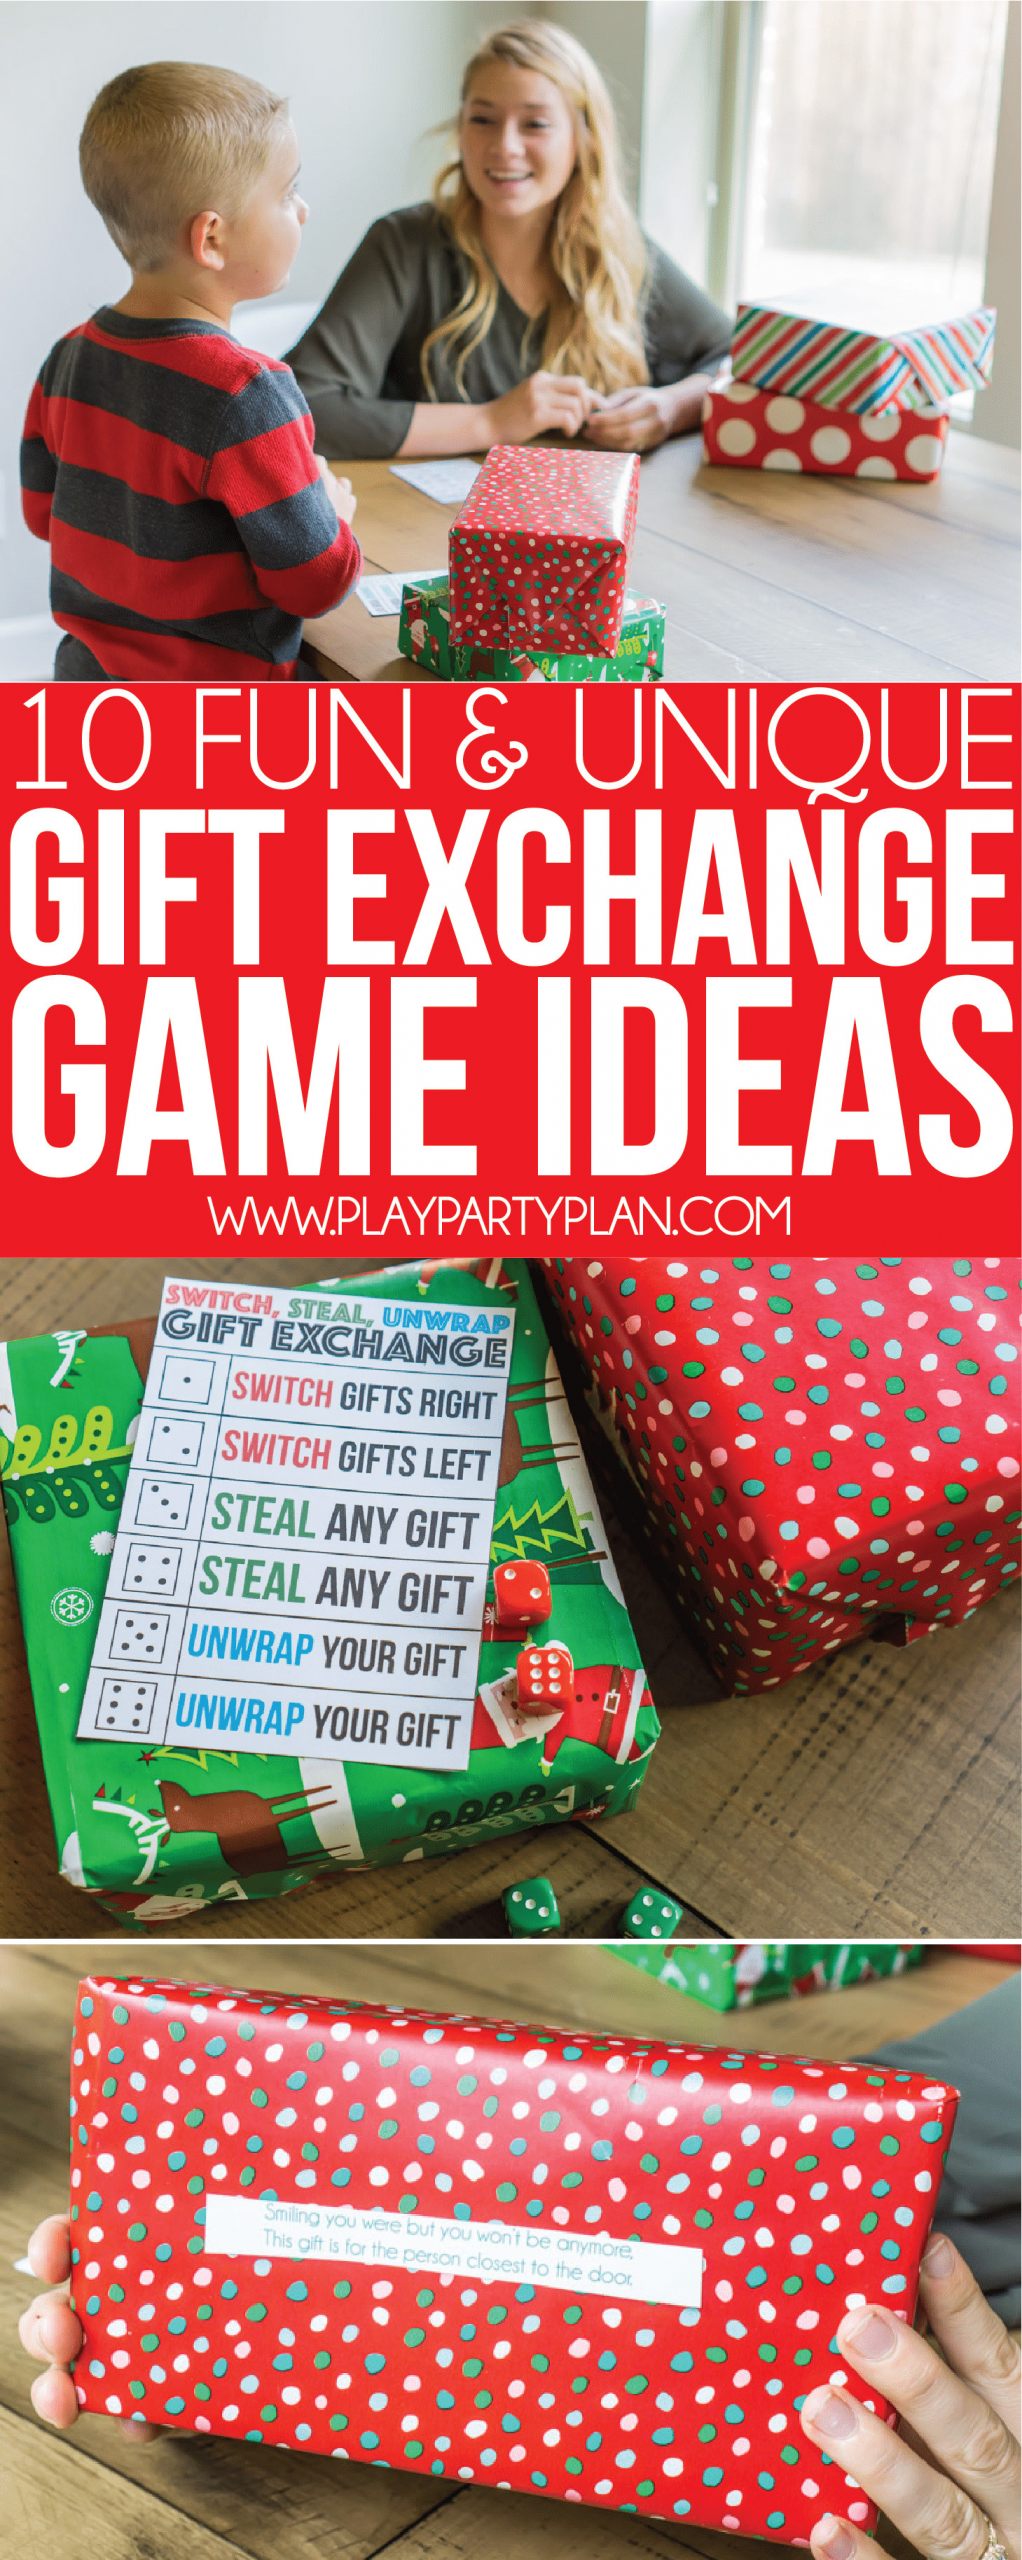 Holiday Party Gift Exchange Ideas
 12 Best Christmas Gift Exchange Games Play Party Plan